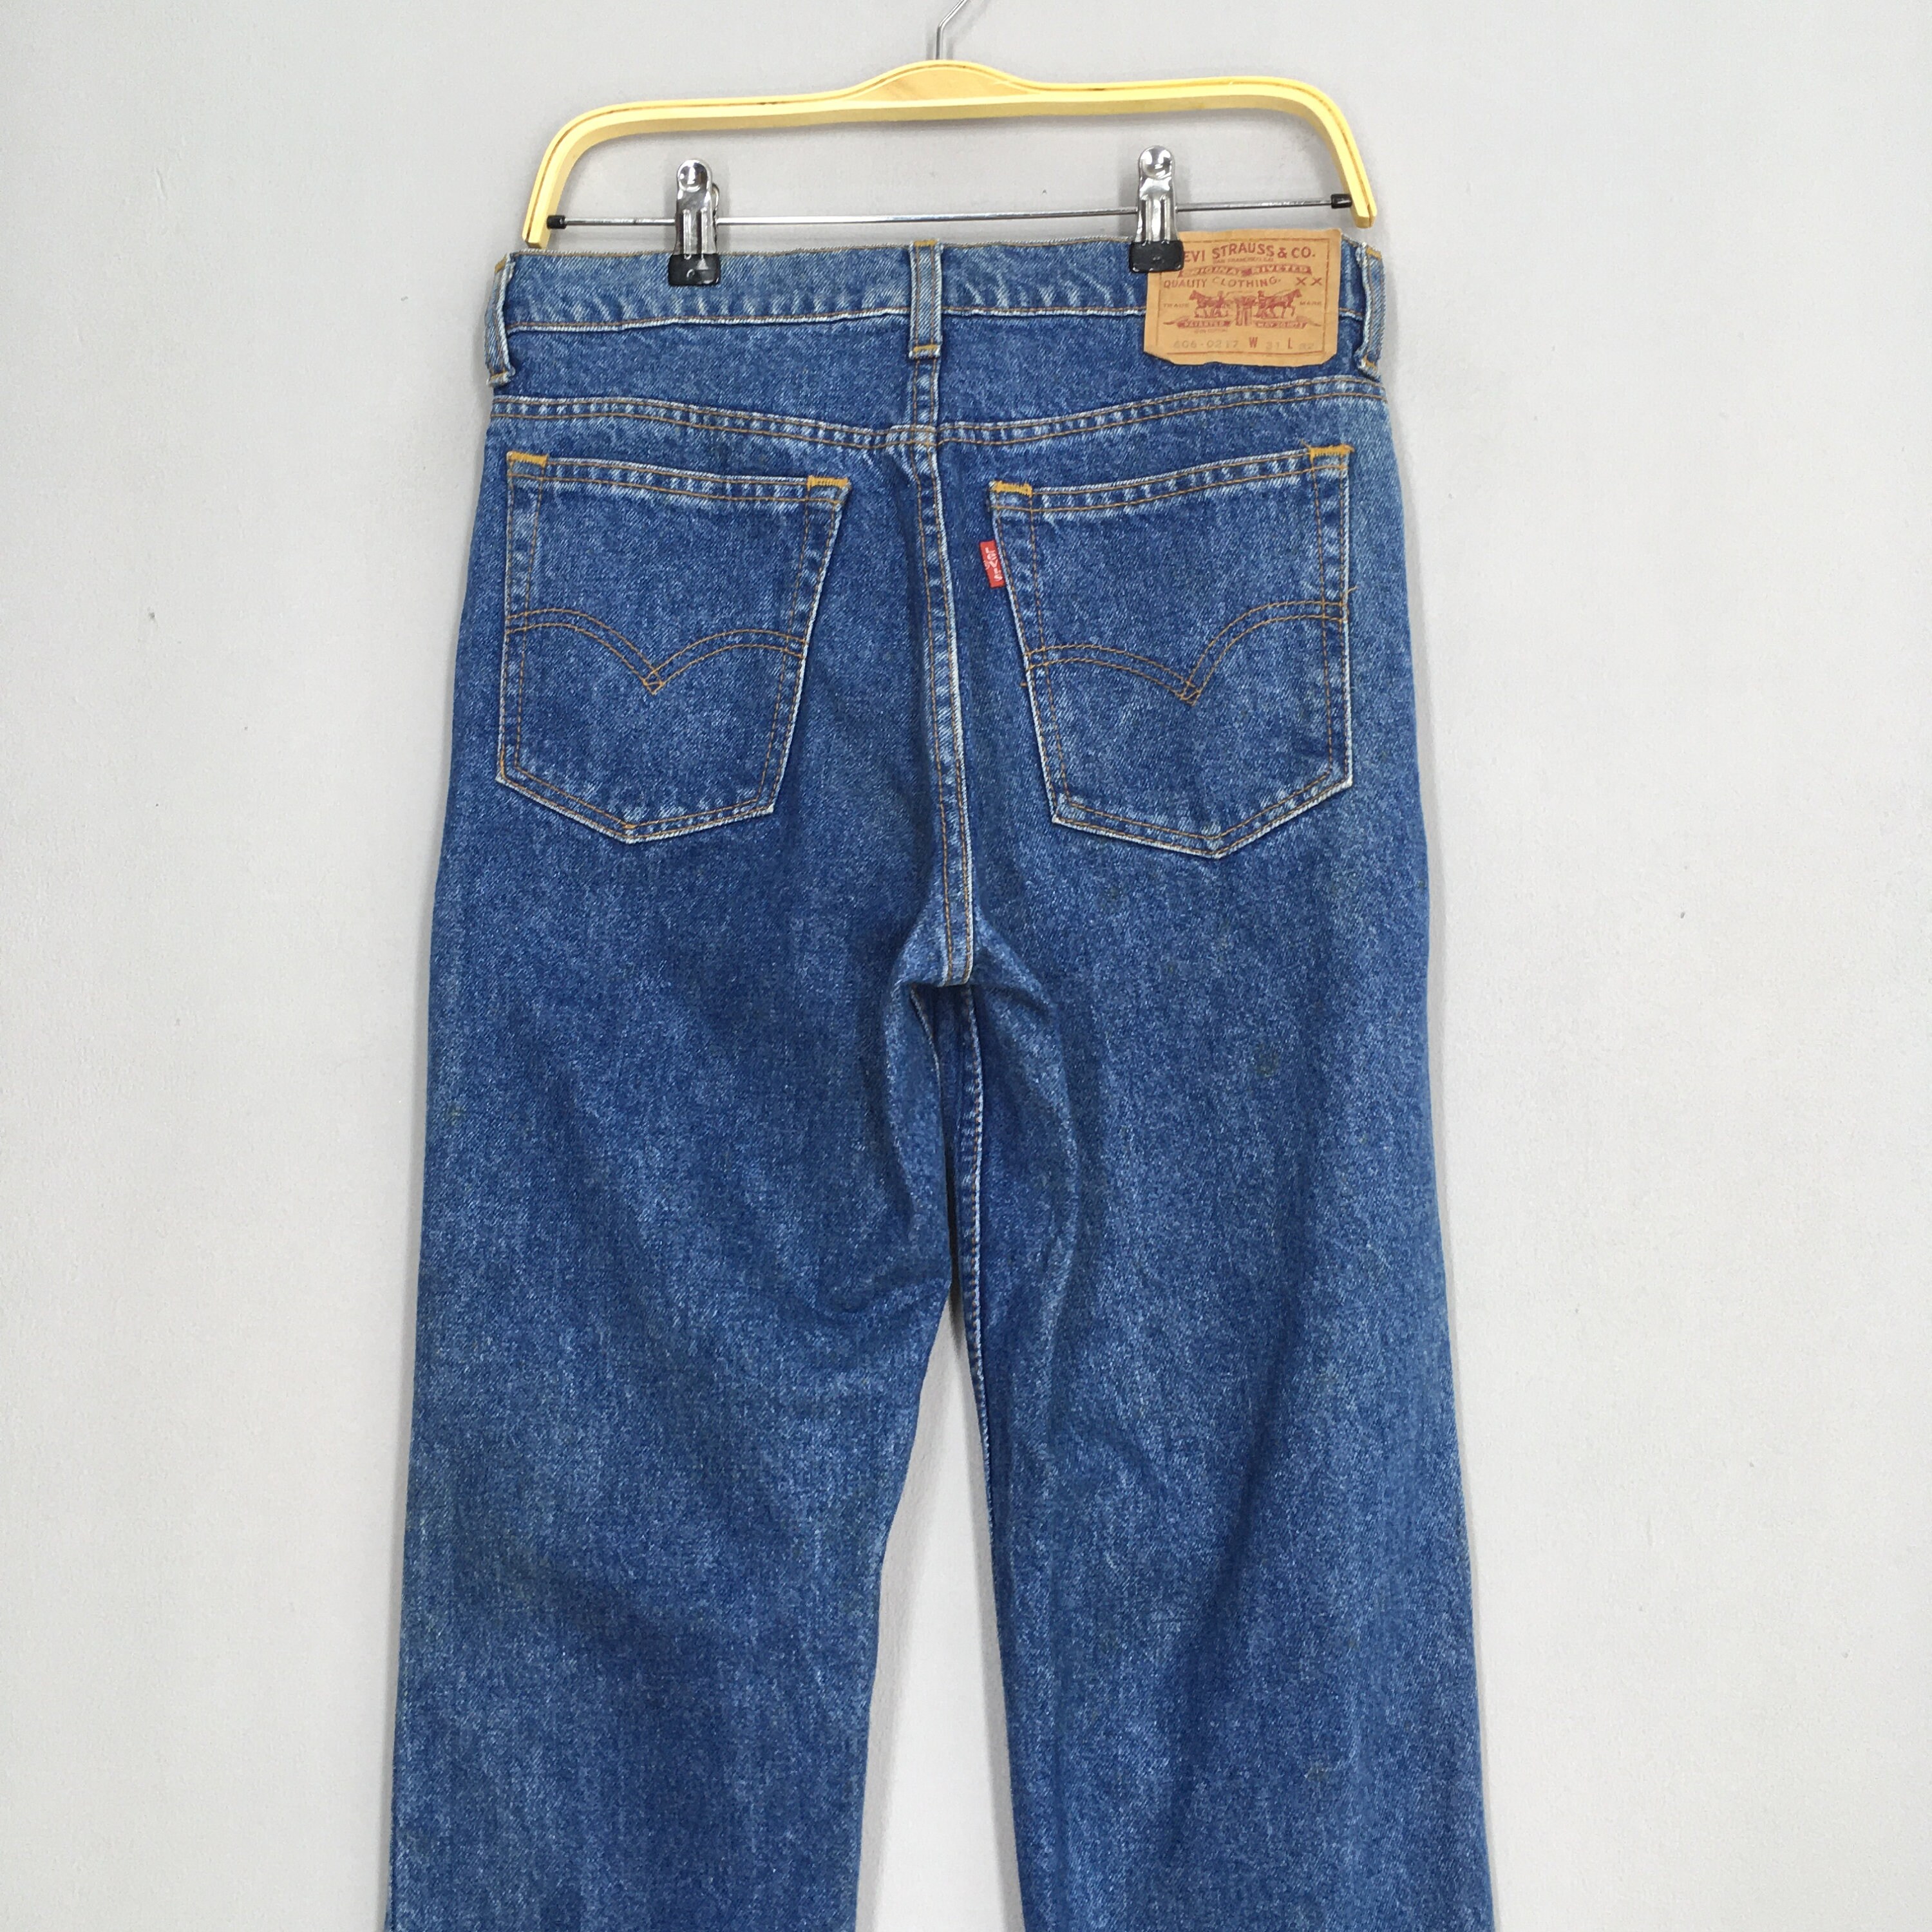 Clothing Gender-Neutral Adult Clothing Shorts Vintage Levi Strauss & Co 527 cut off jeans Unisex jeans shorts 33 inch waist 